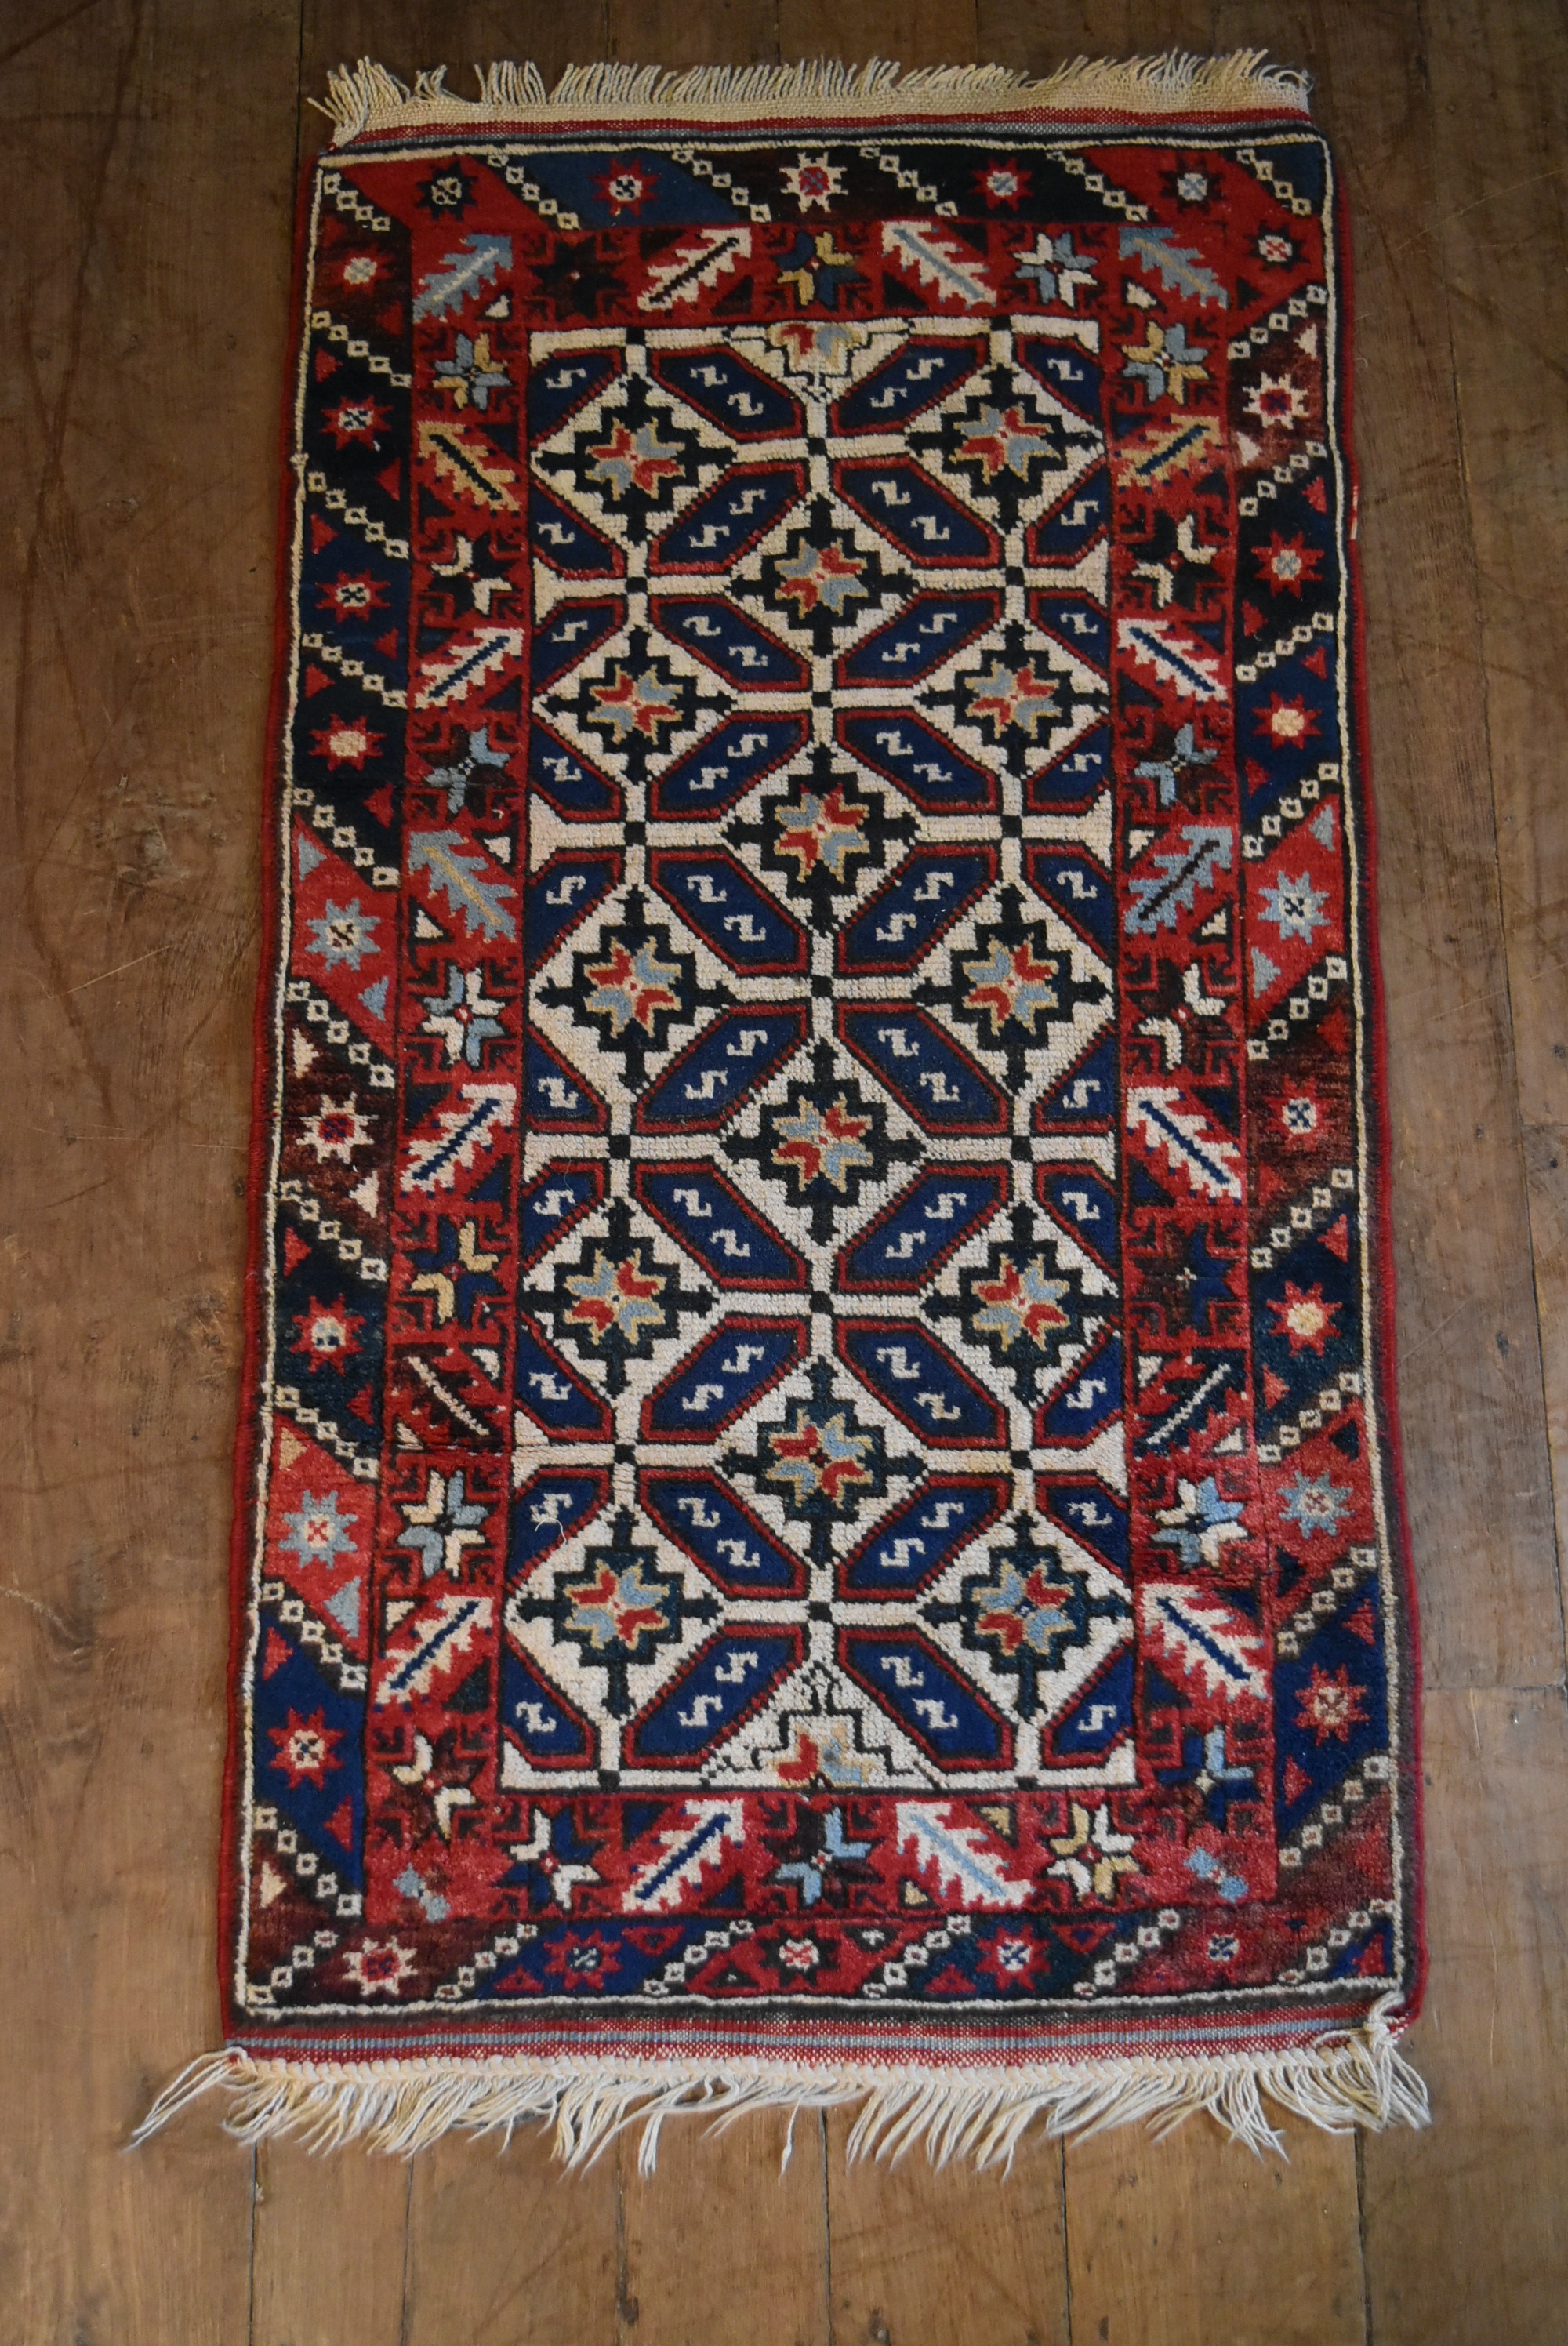 A Kazak rug with repeating stylised flowerhead motifs across the field contained by serrated palm